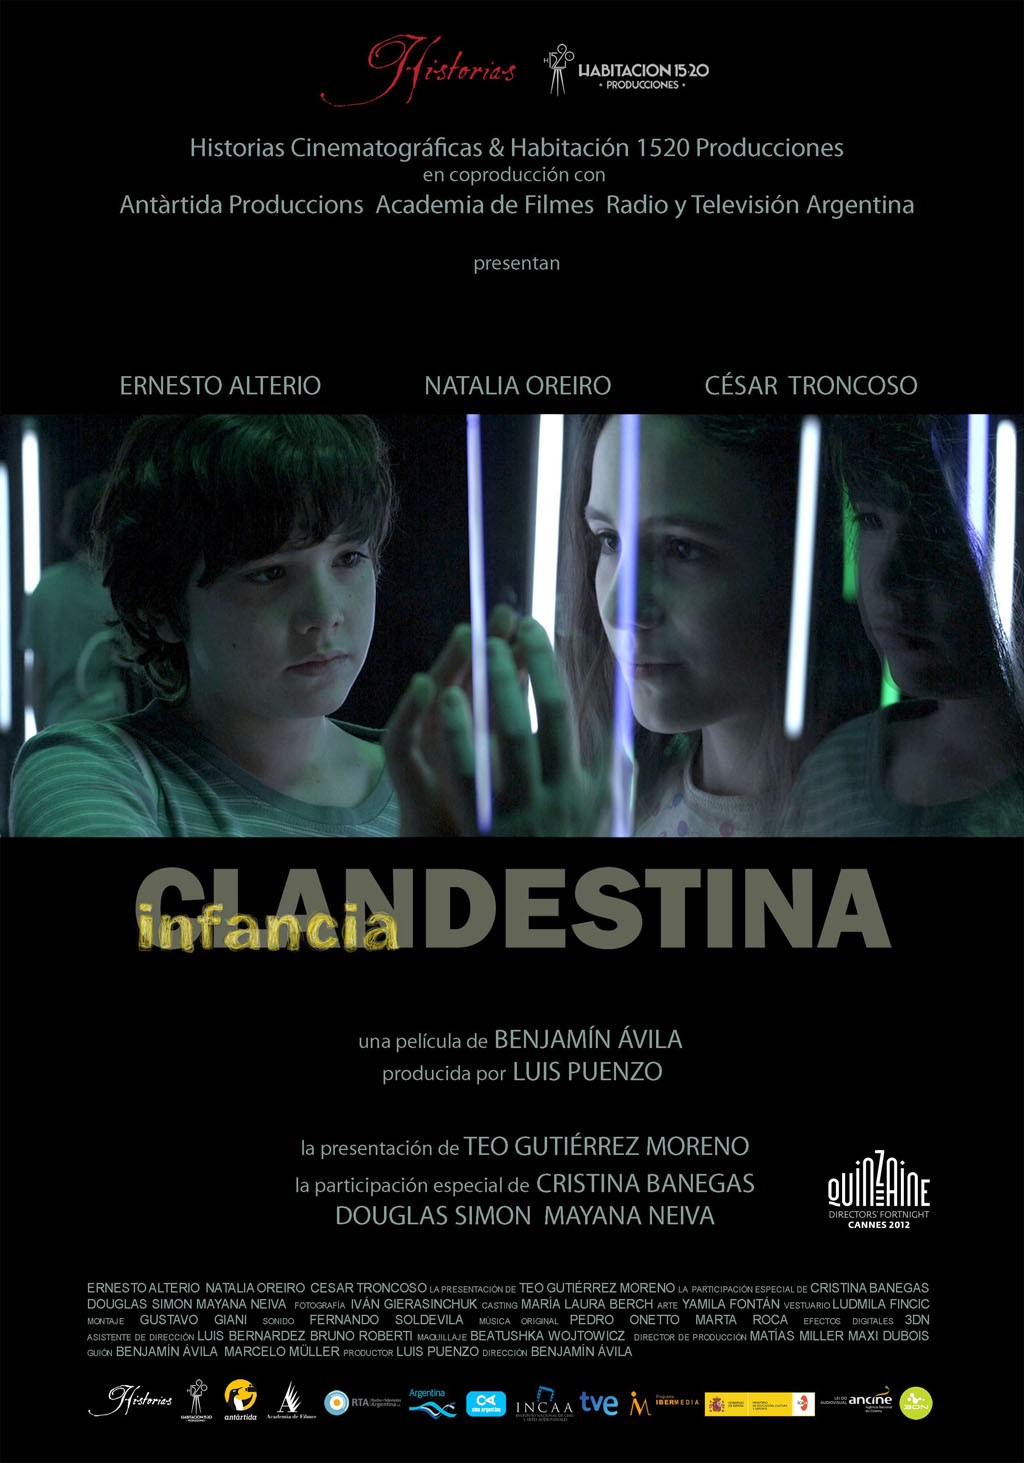 Extra Large Movie Poster Image for Infancia clandestina (#2 of 5)